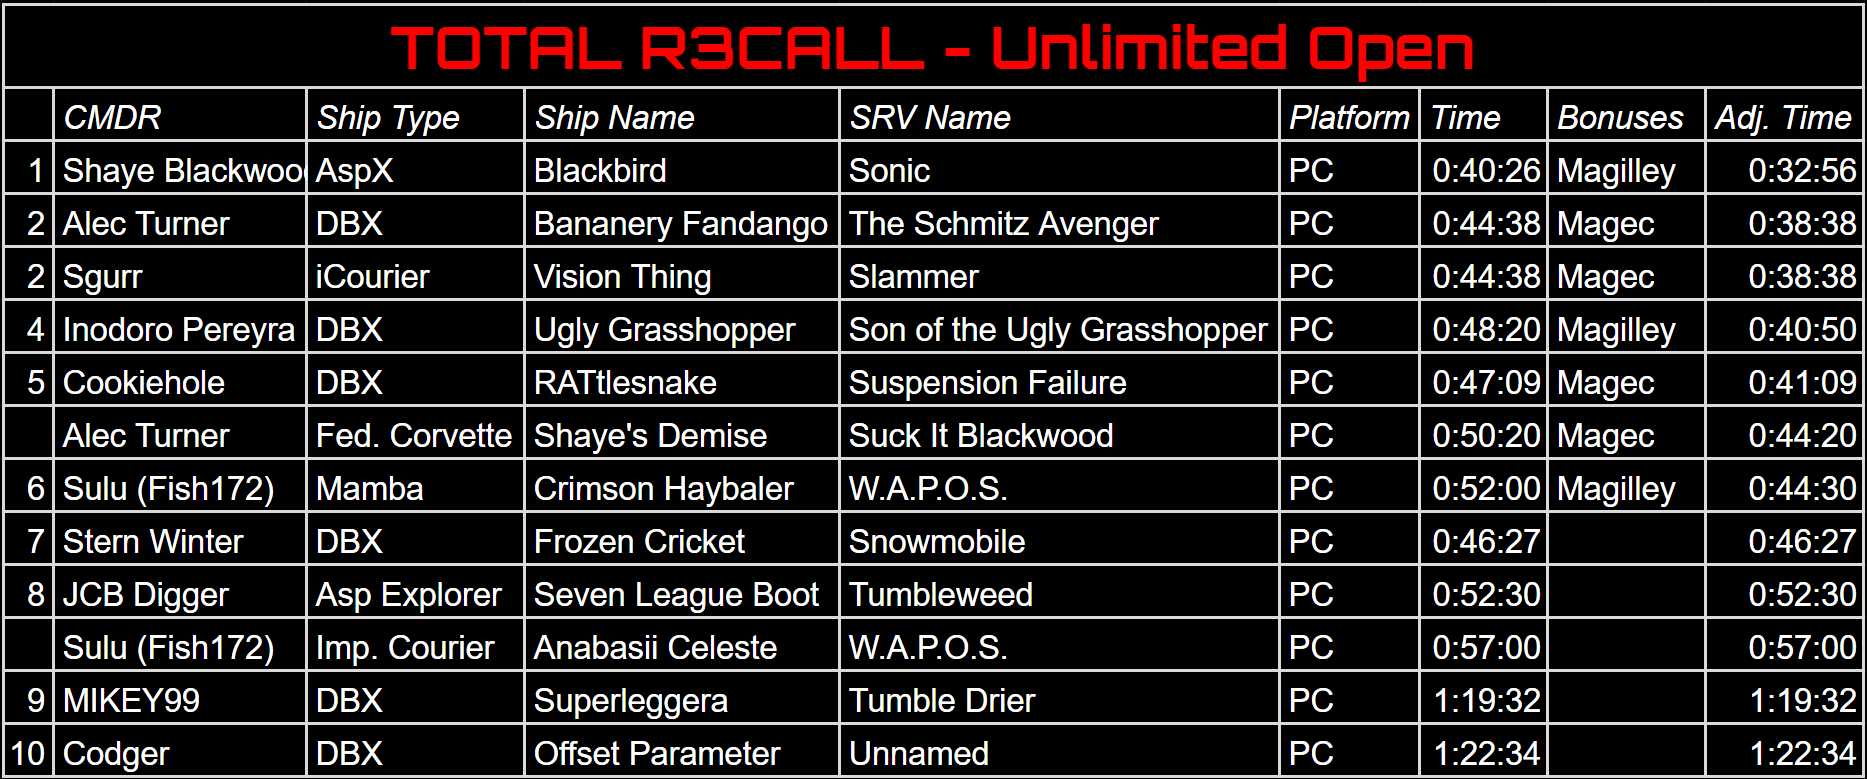 Total Recall 3 results (Unlimited)